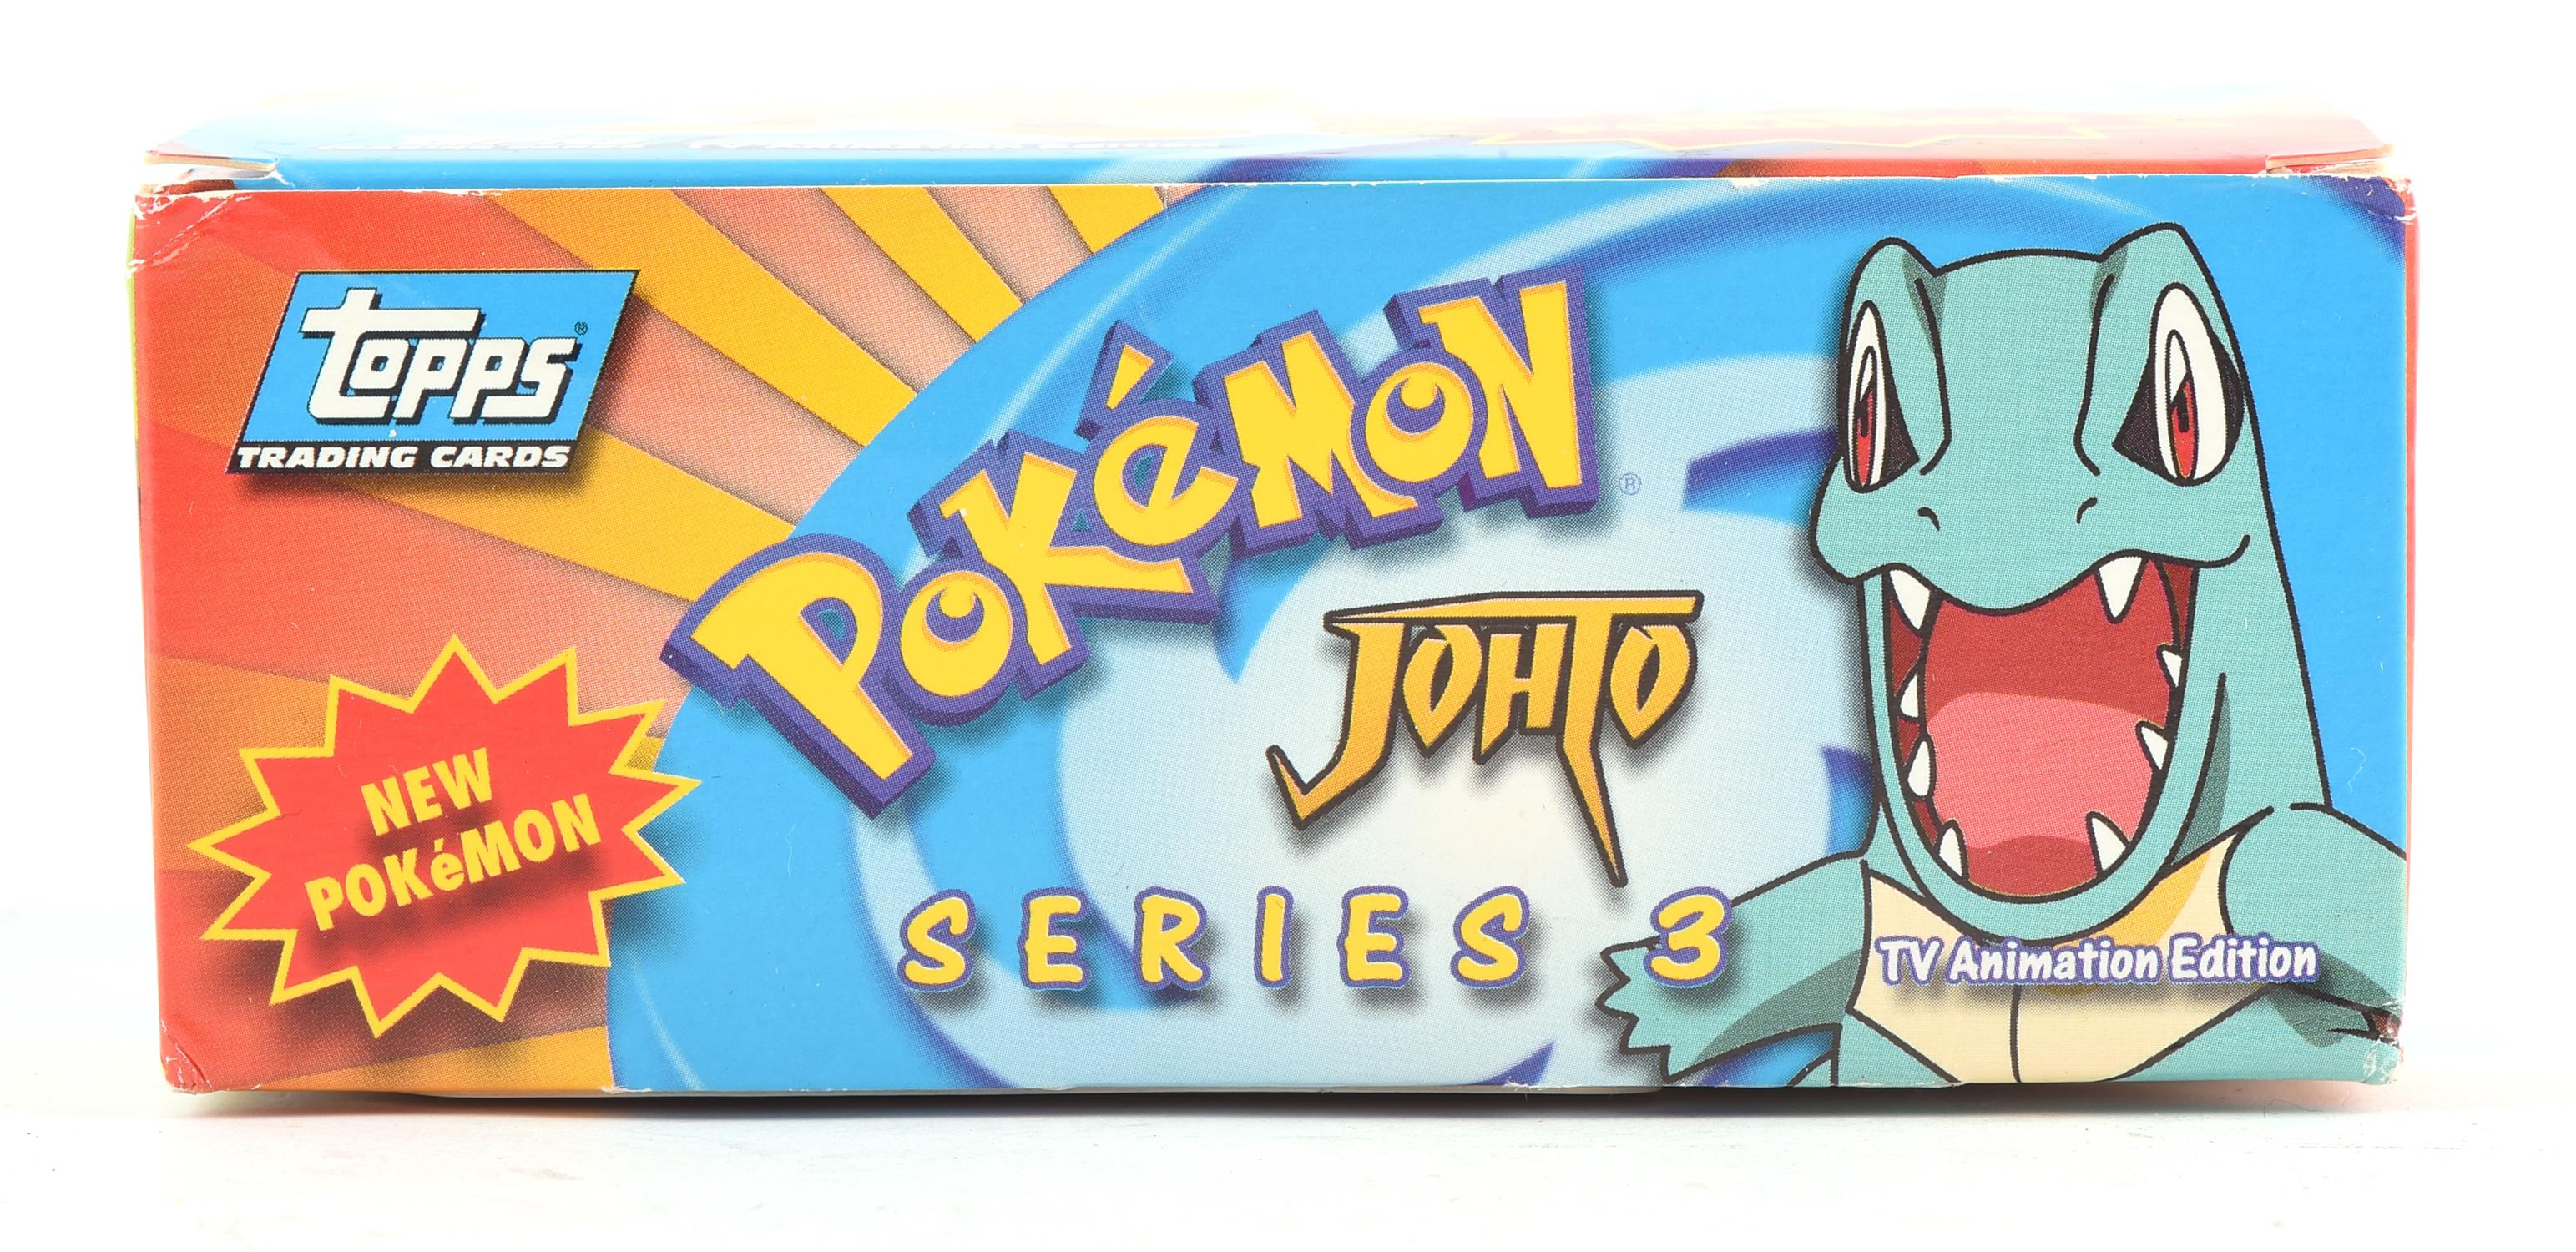 Pokemon TCG. Topps Johto series 3 opened booster box containing 24 sealed packs. Provenance: The - Image 2 of 9